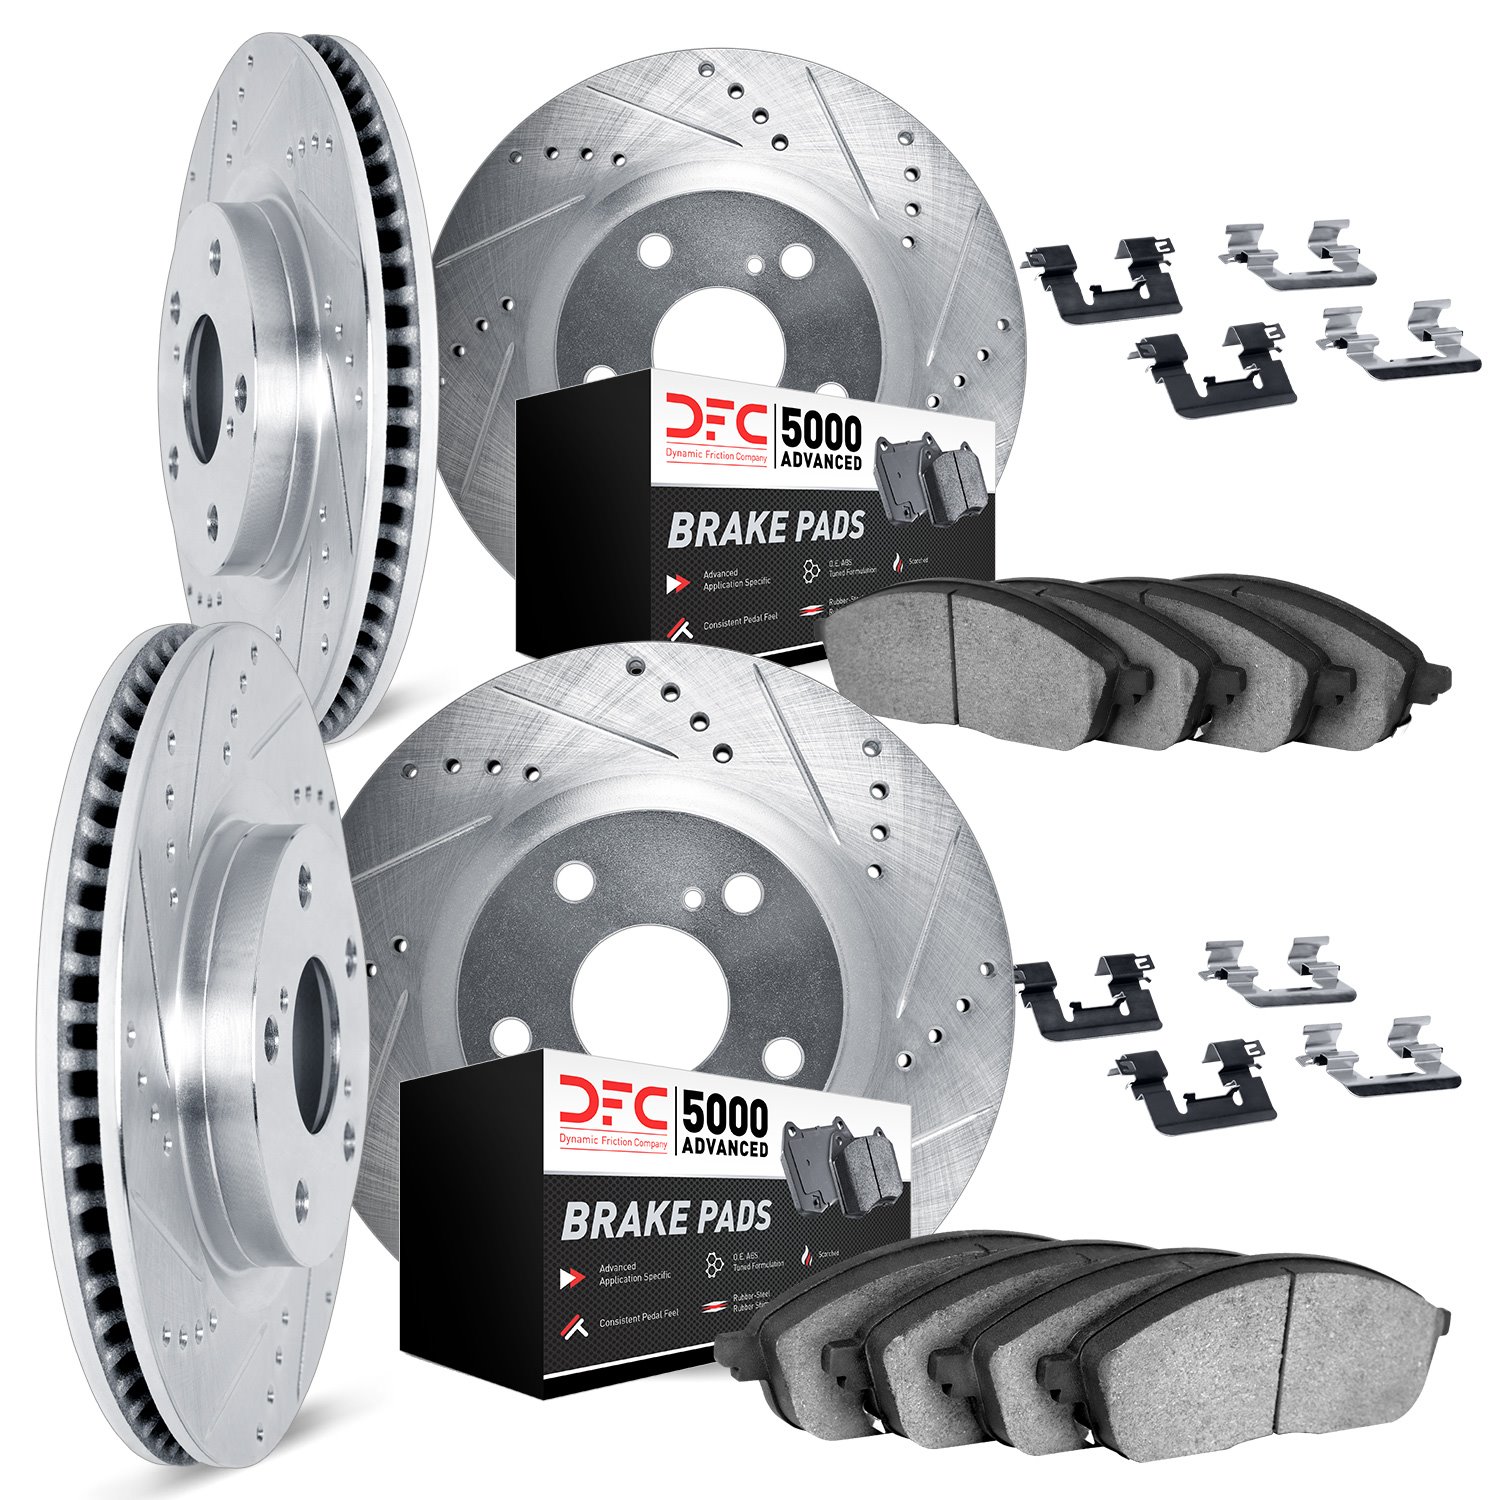 7514-01007 Drilled/Slotted Brake Rotors w/5000 Advanced Brake Pads Kit & Hardware [Silver], 2009-2017 Suzuki, Position: Front an